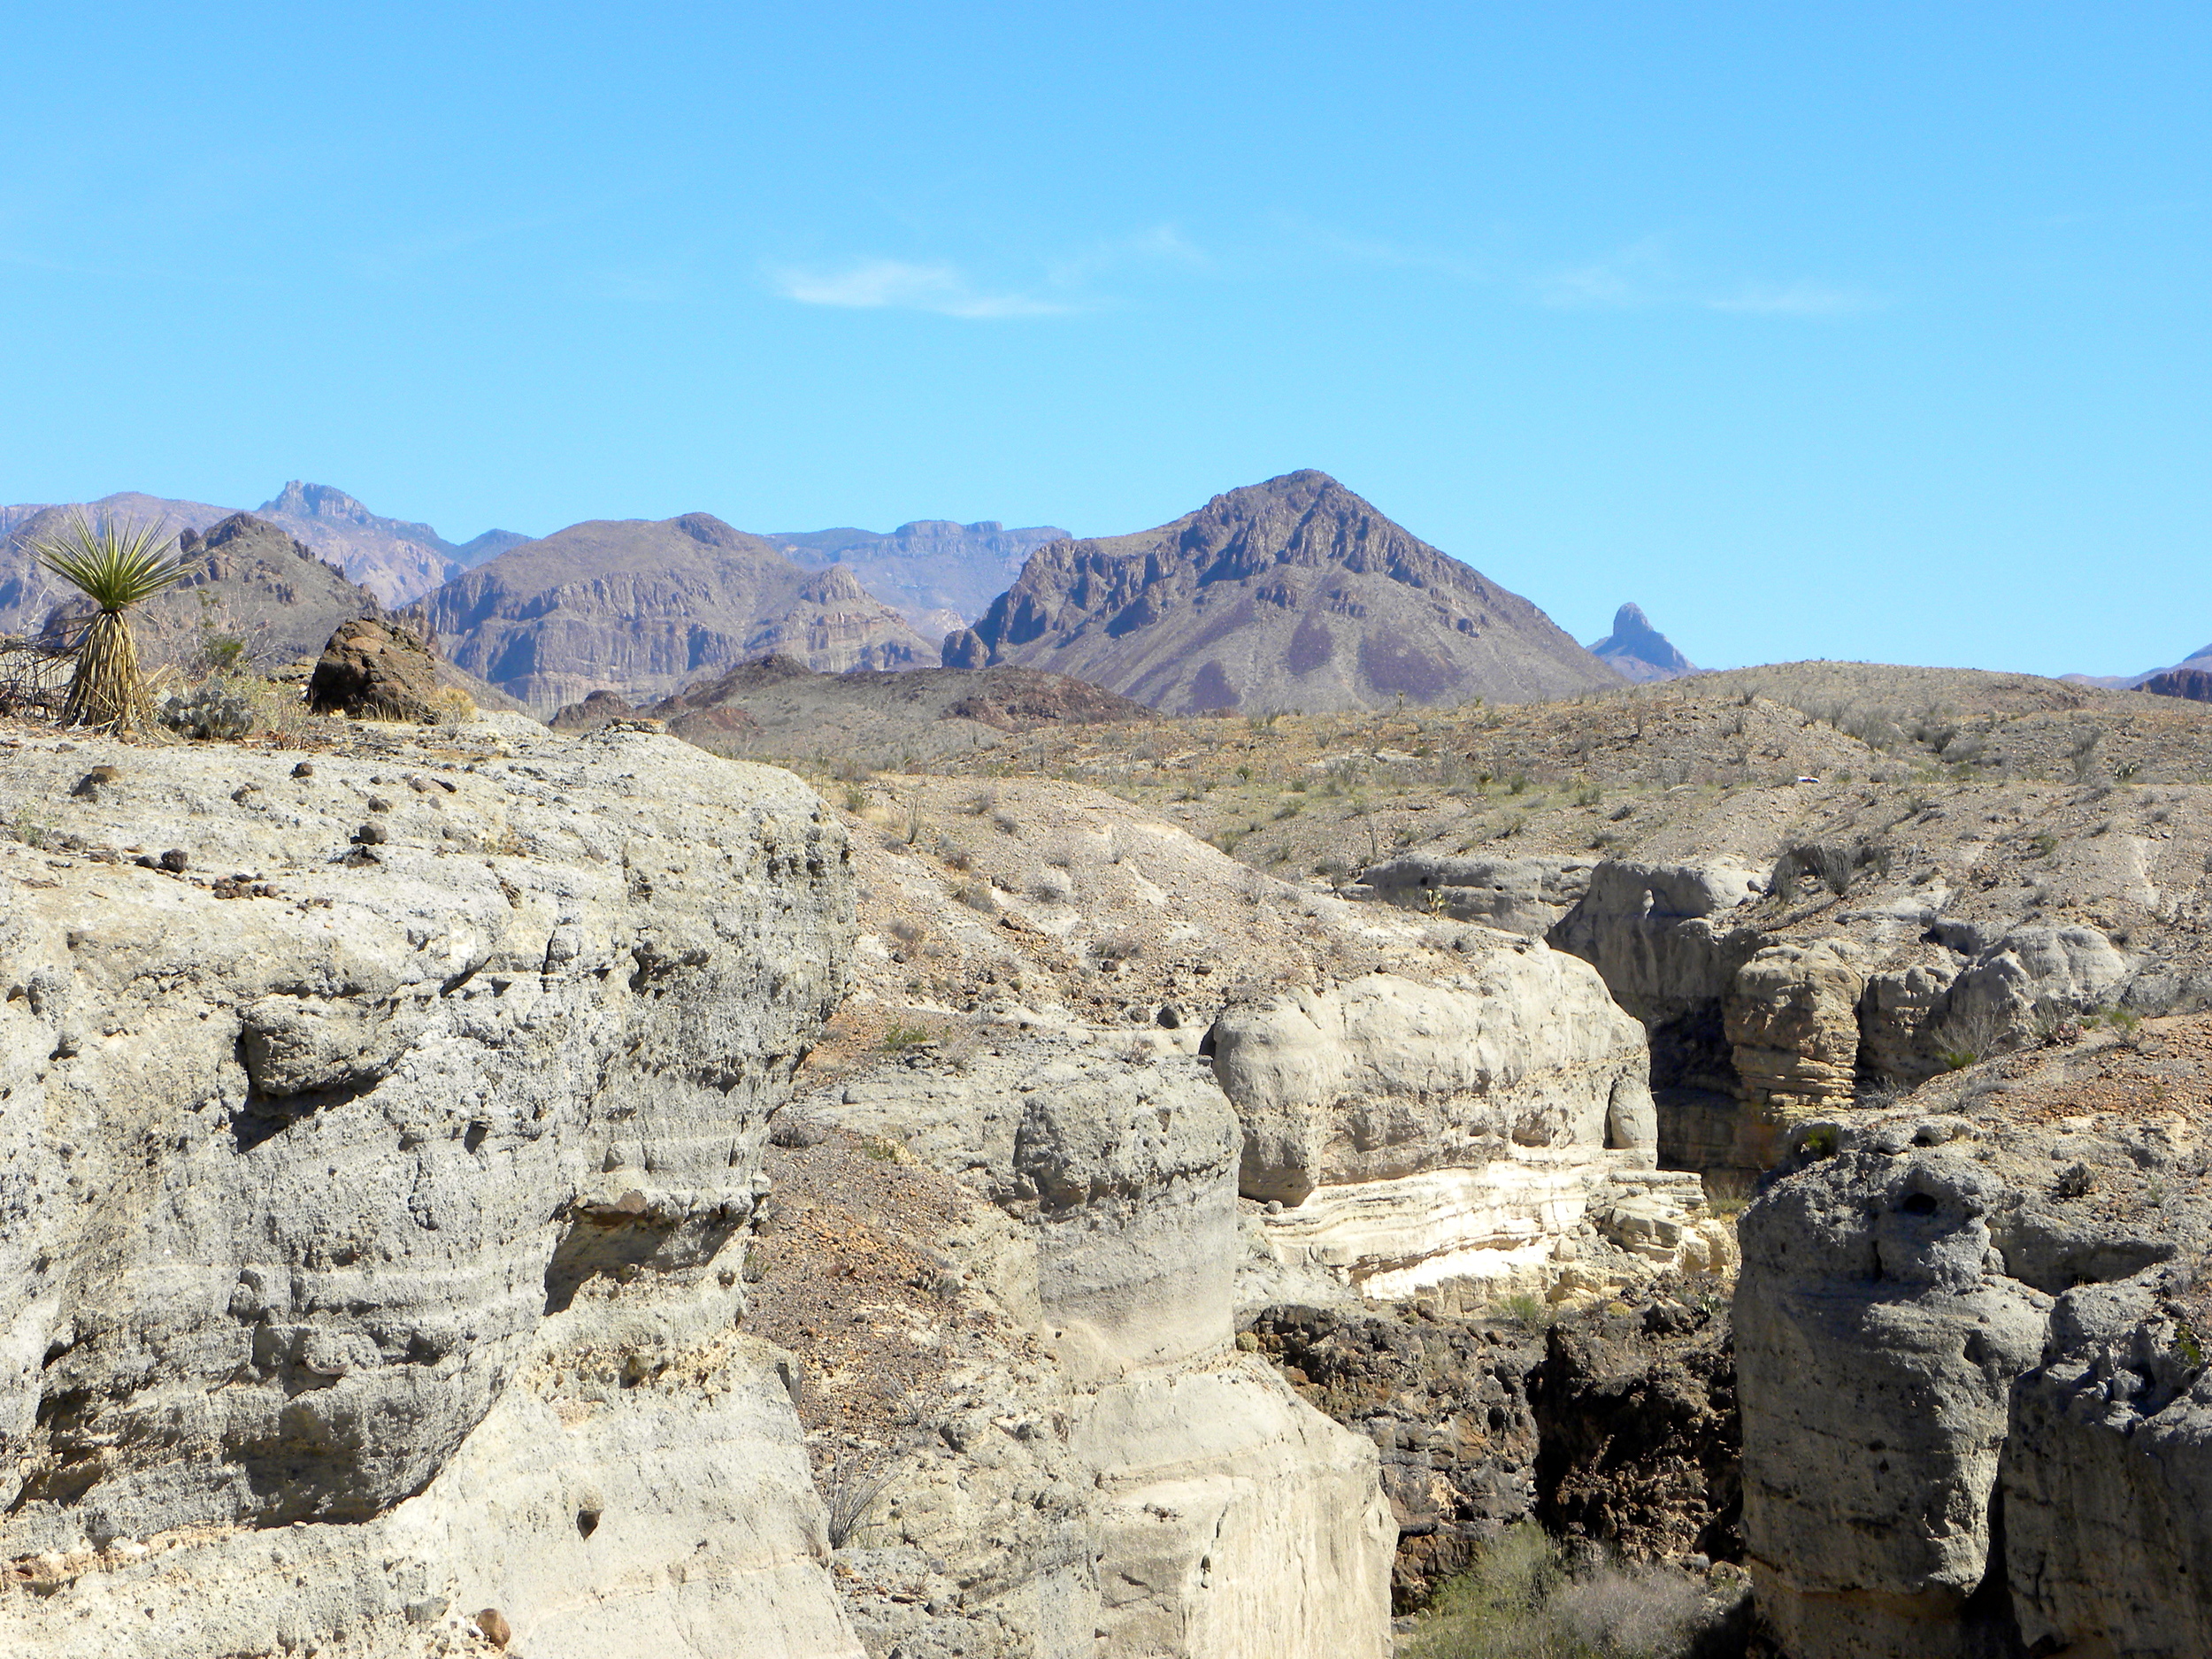 Tuff Canyon Overlook And Trail At Big Bend National Park